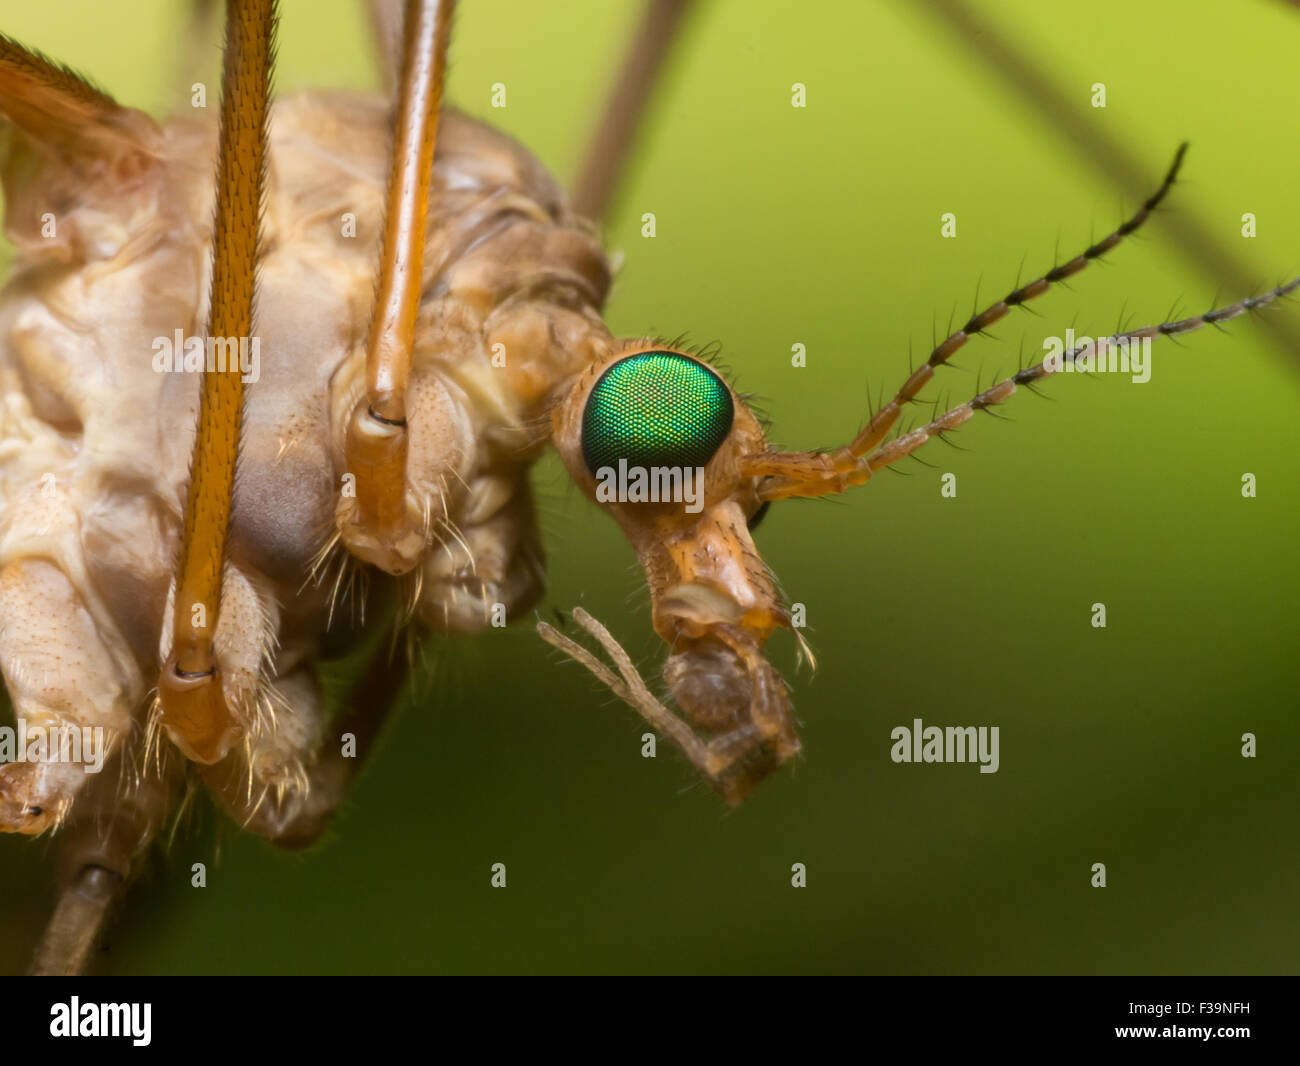 Crane Fly (Mosquito Hawk) with bright green eyes close up profile view Stock Photo